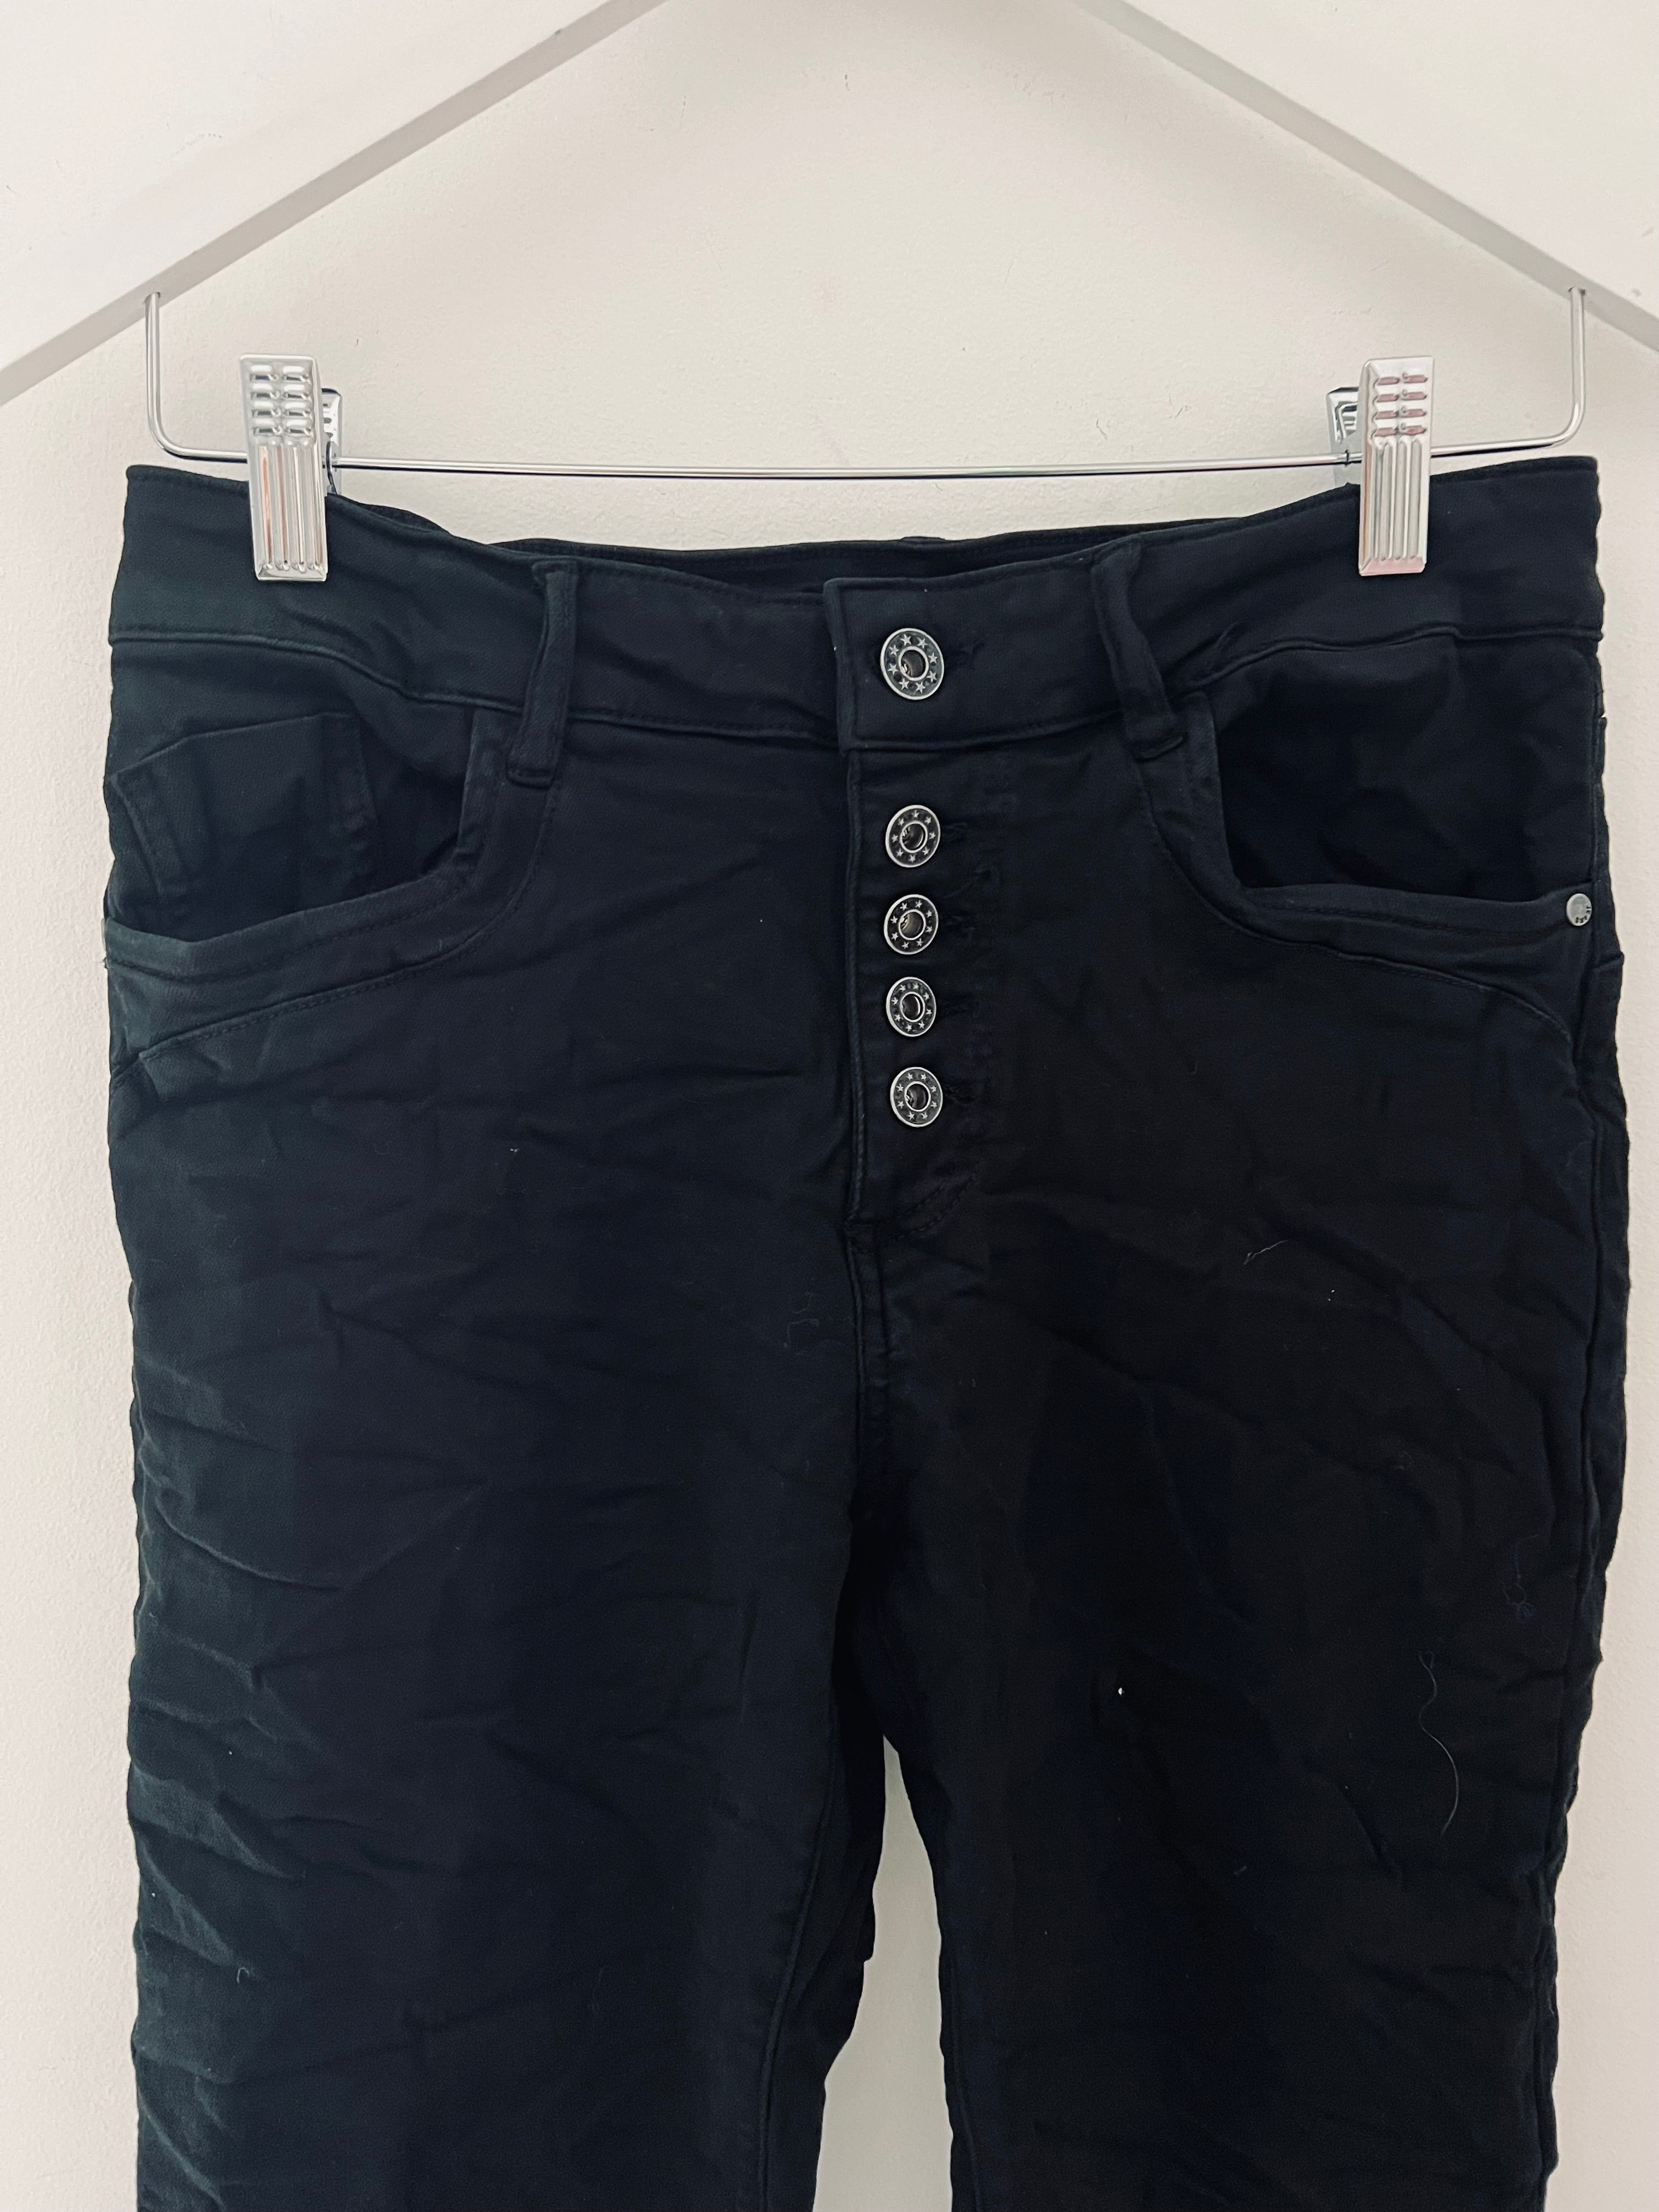 Button Fly Stretch Jeans in Black